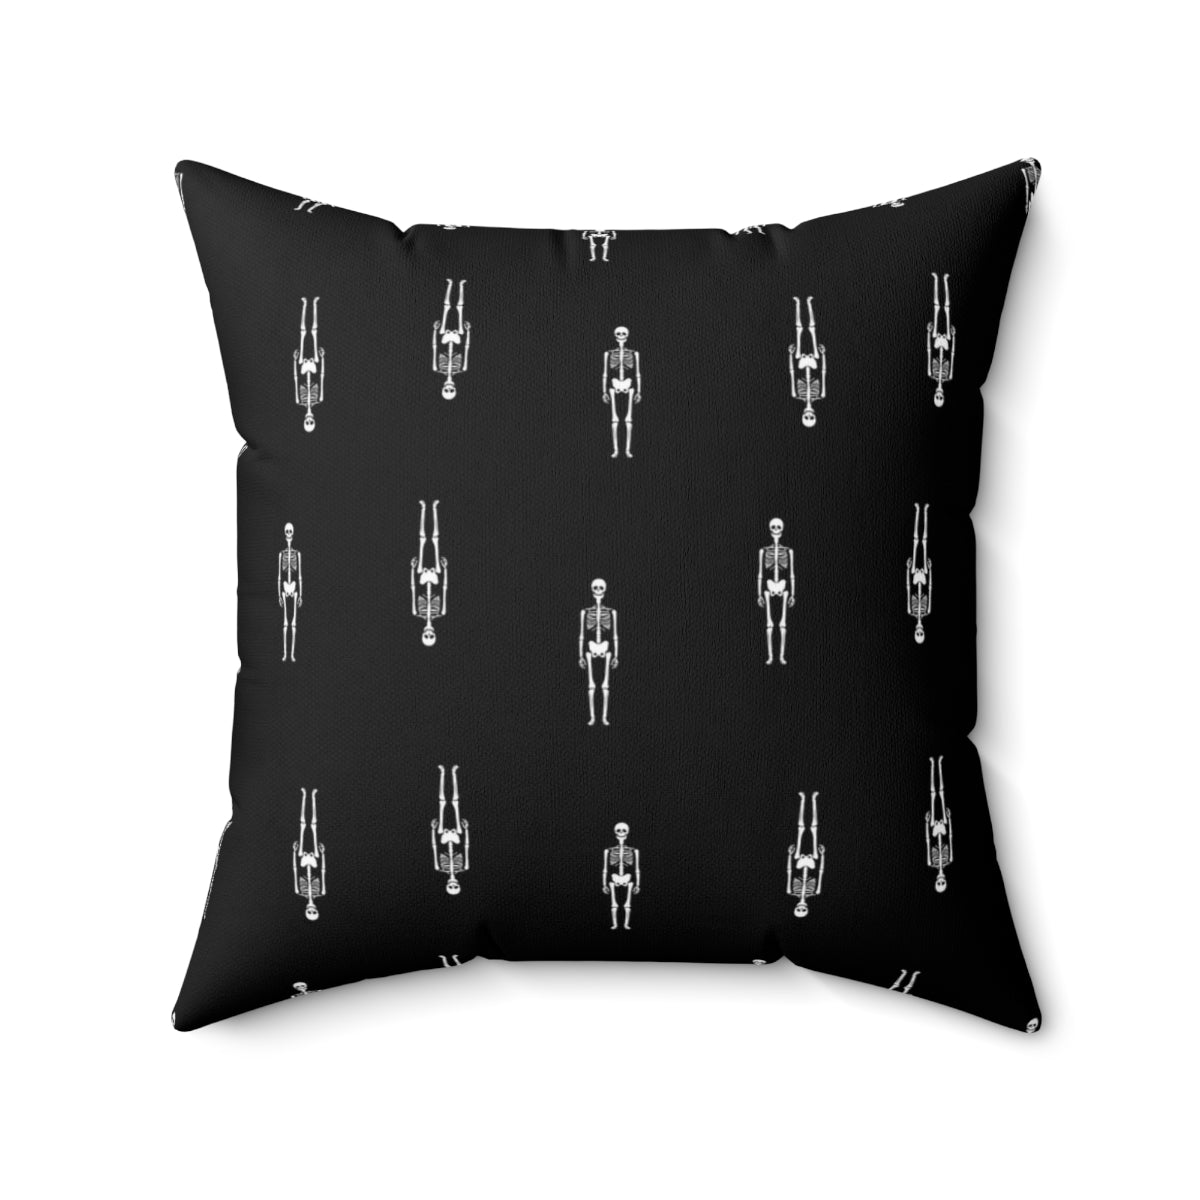 Scary Skeletons Pillow Cover / Halloween / Black